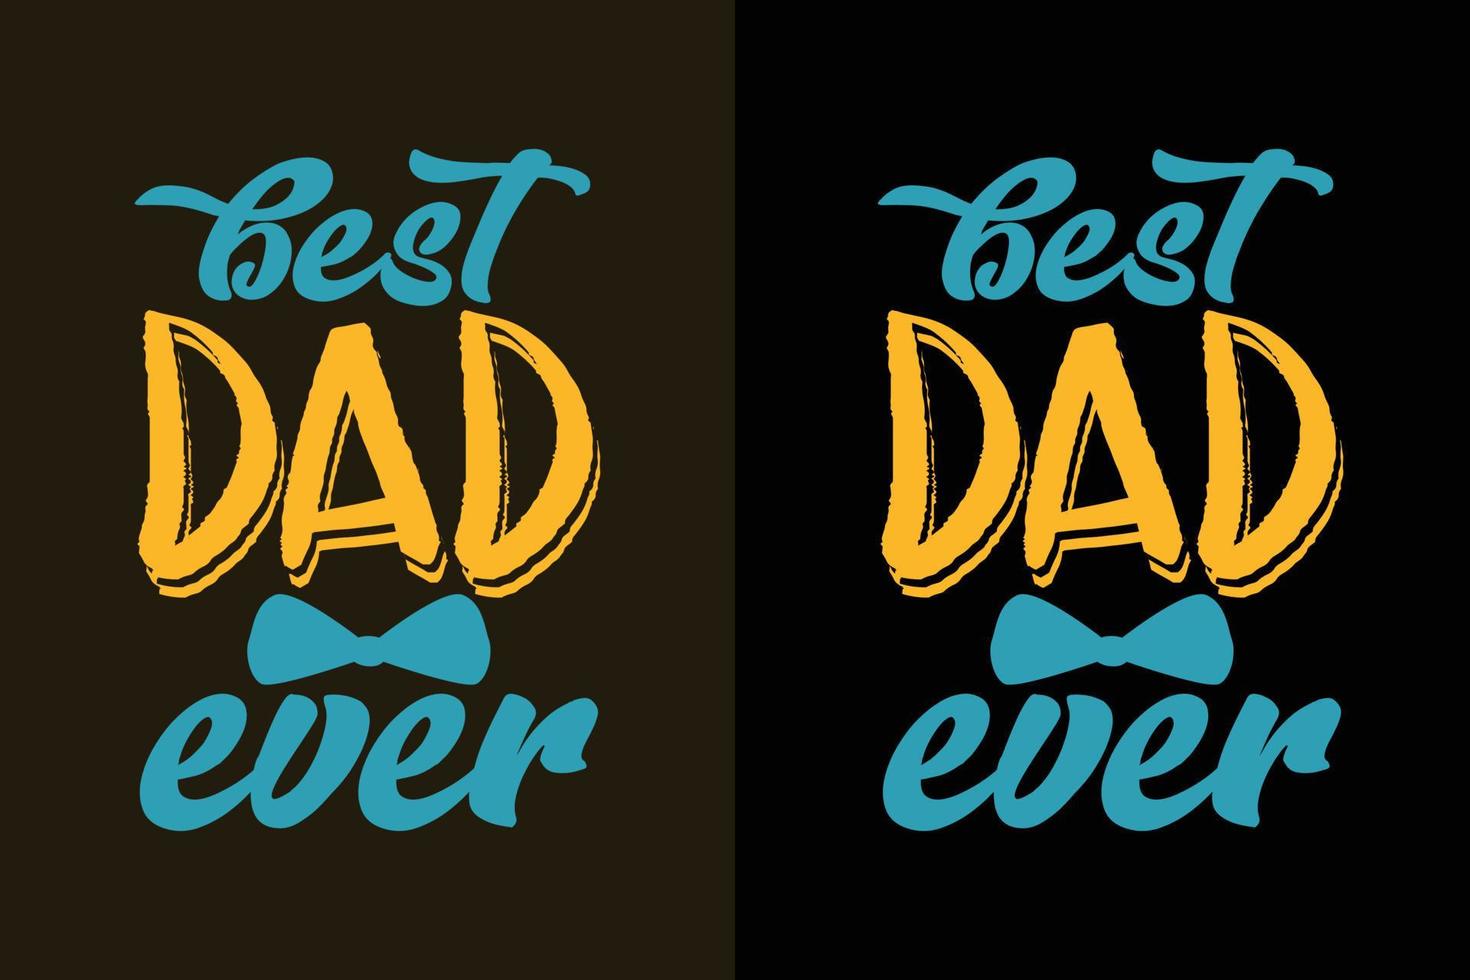 Best dad ever father's day t shirt design quotes vector